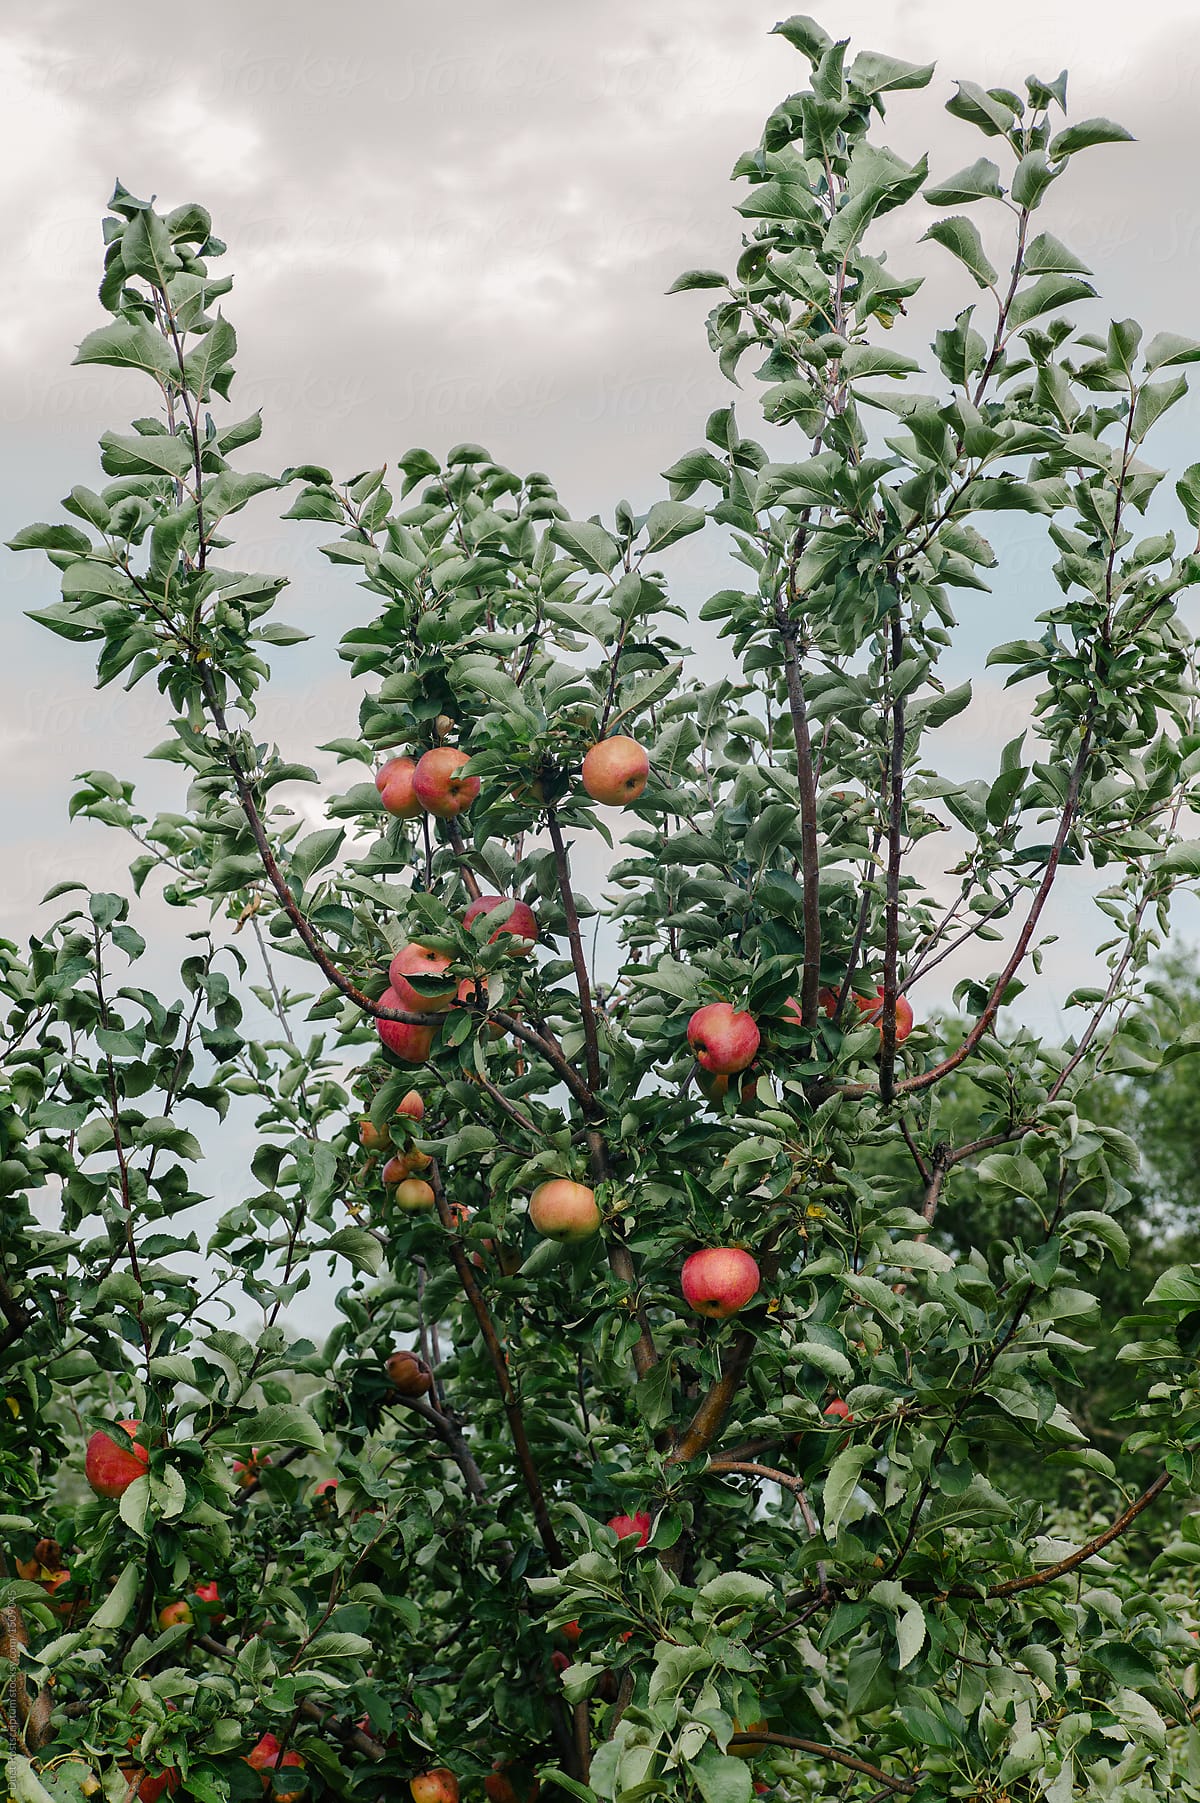 Tree with apples growing